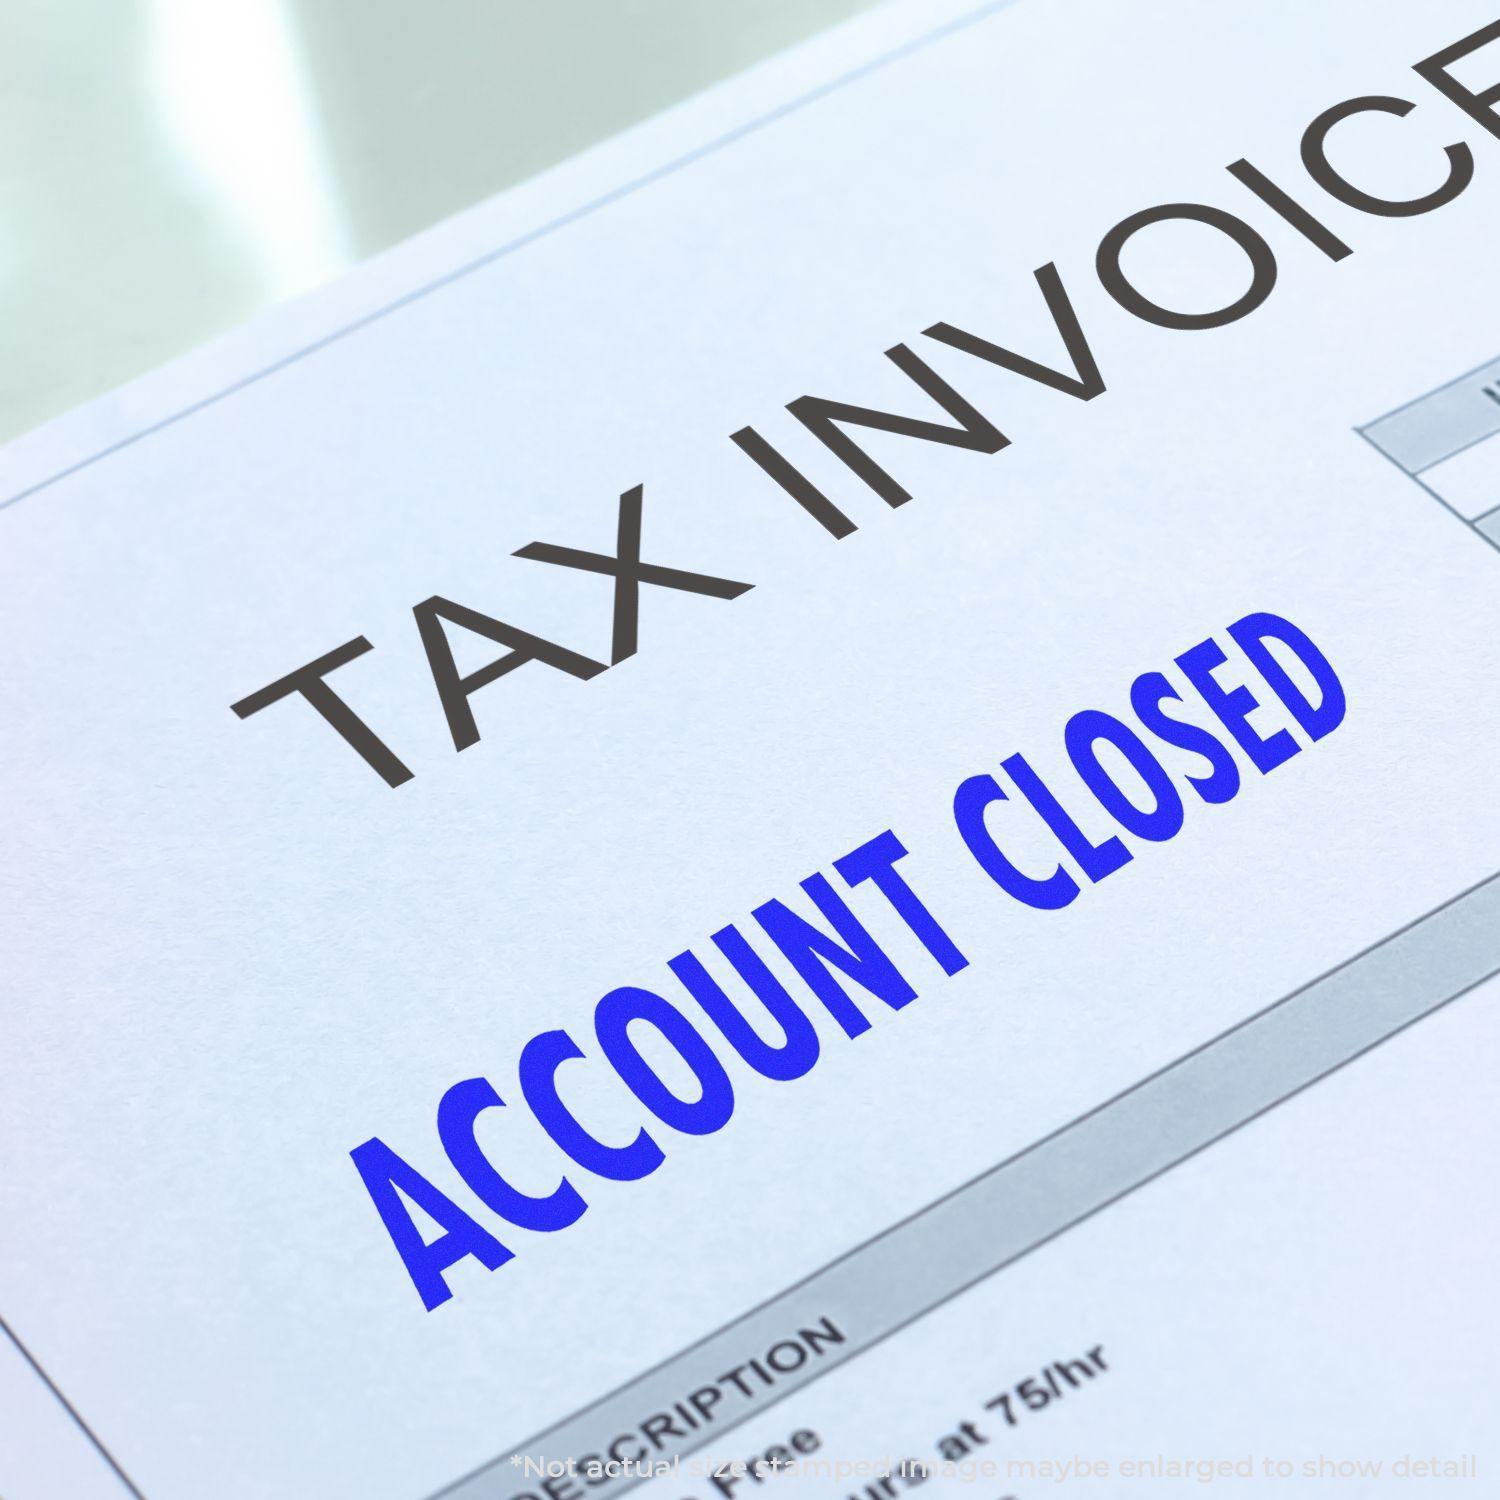 Large Self-Inking Account Closed Stamp image, showing "ACCOUNT CLOSED" message in large blue font on the tax invoice.